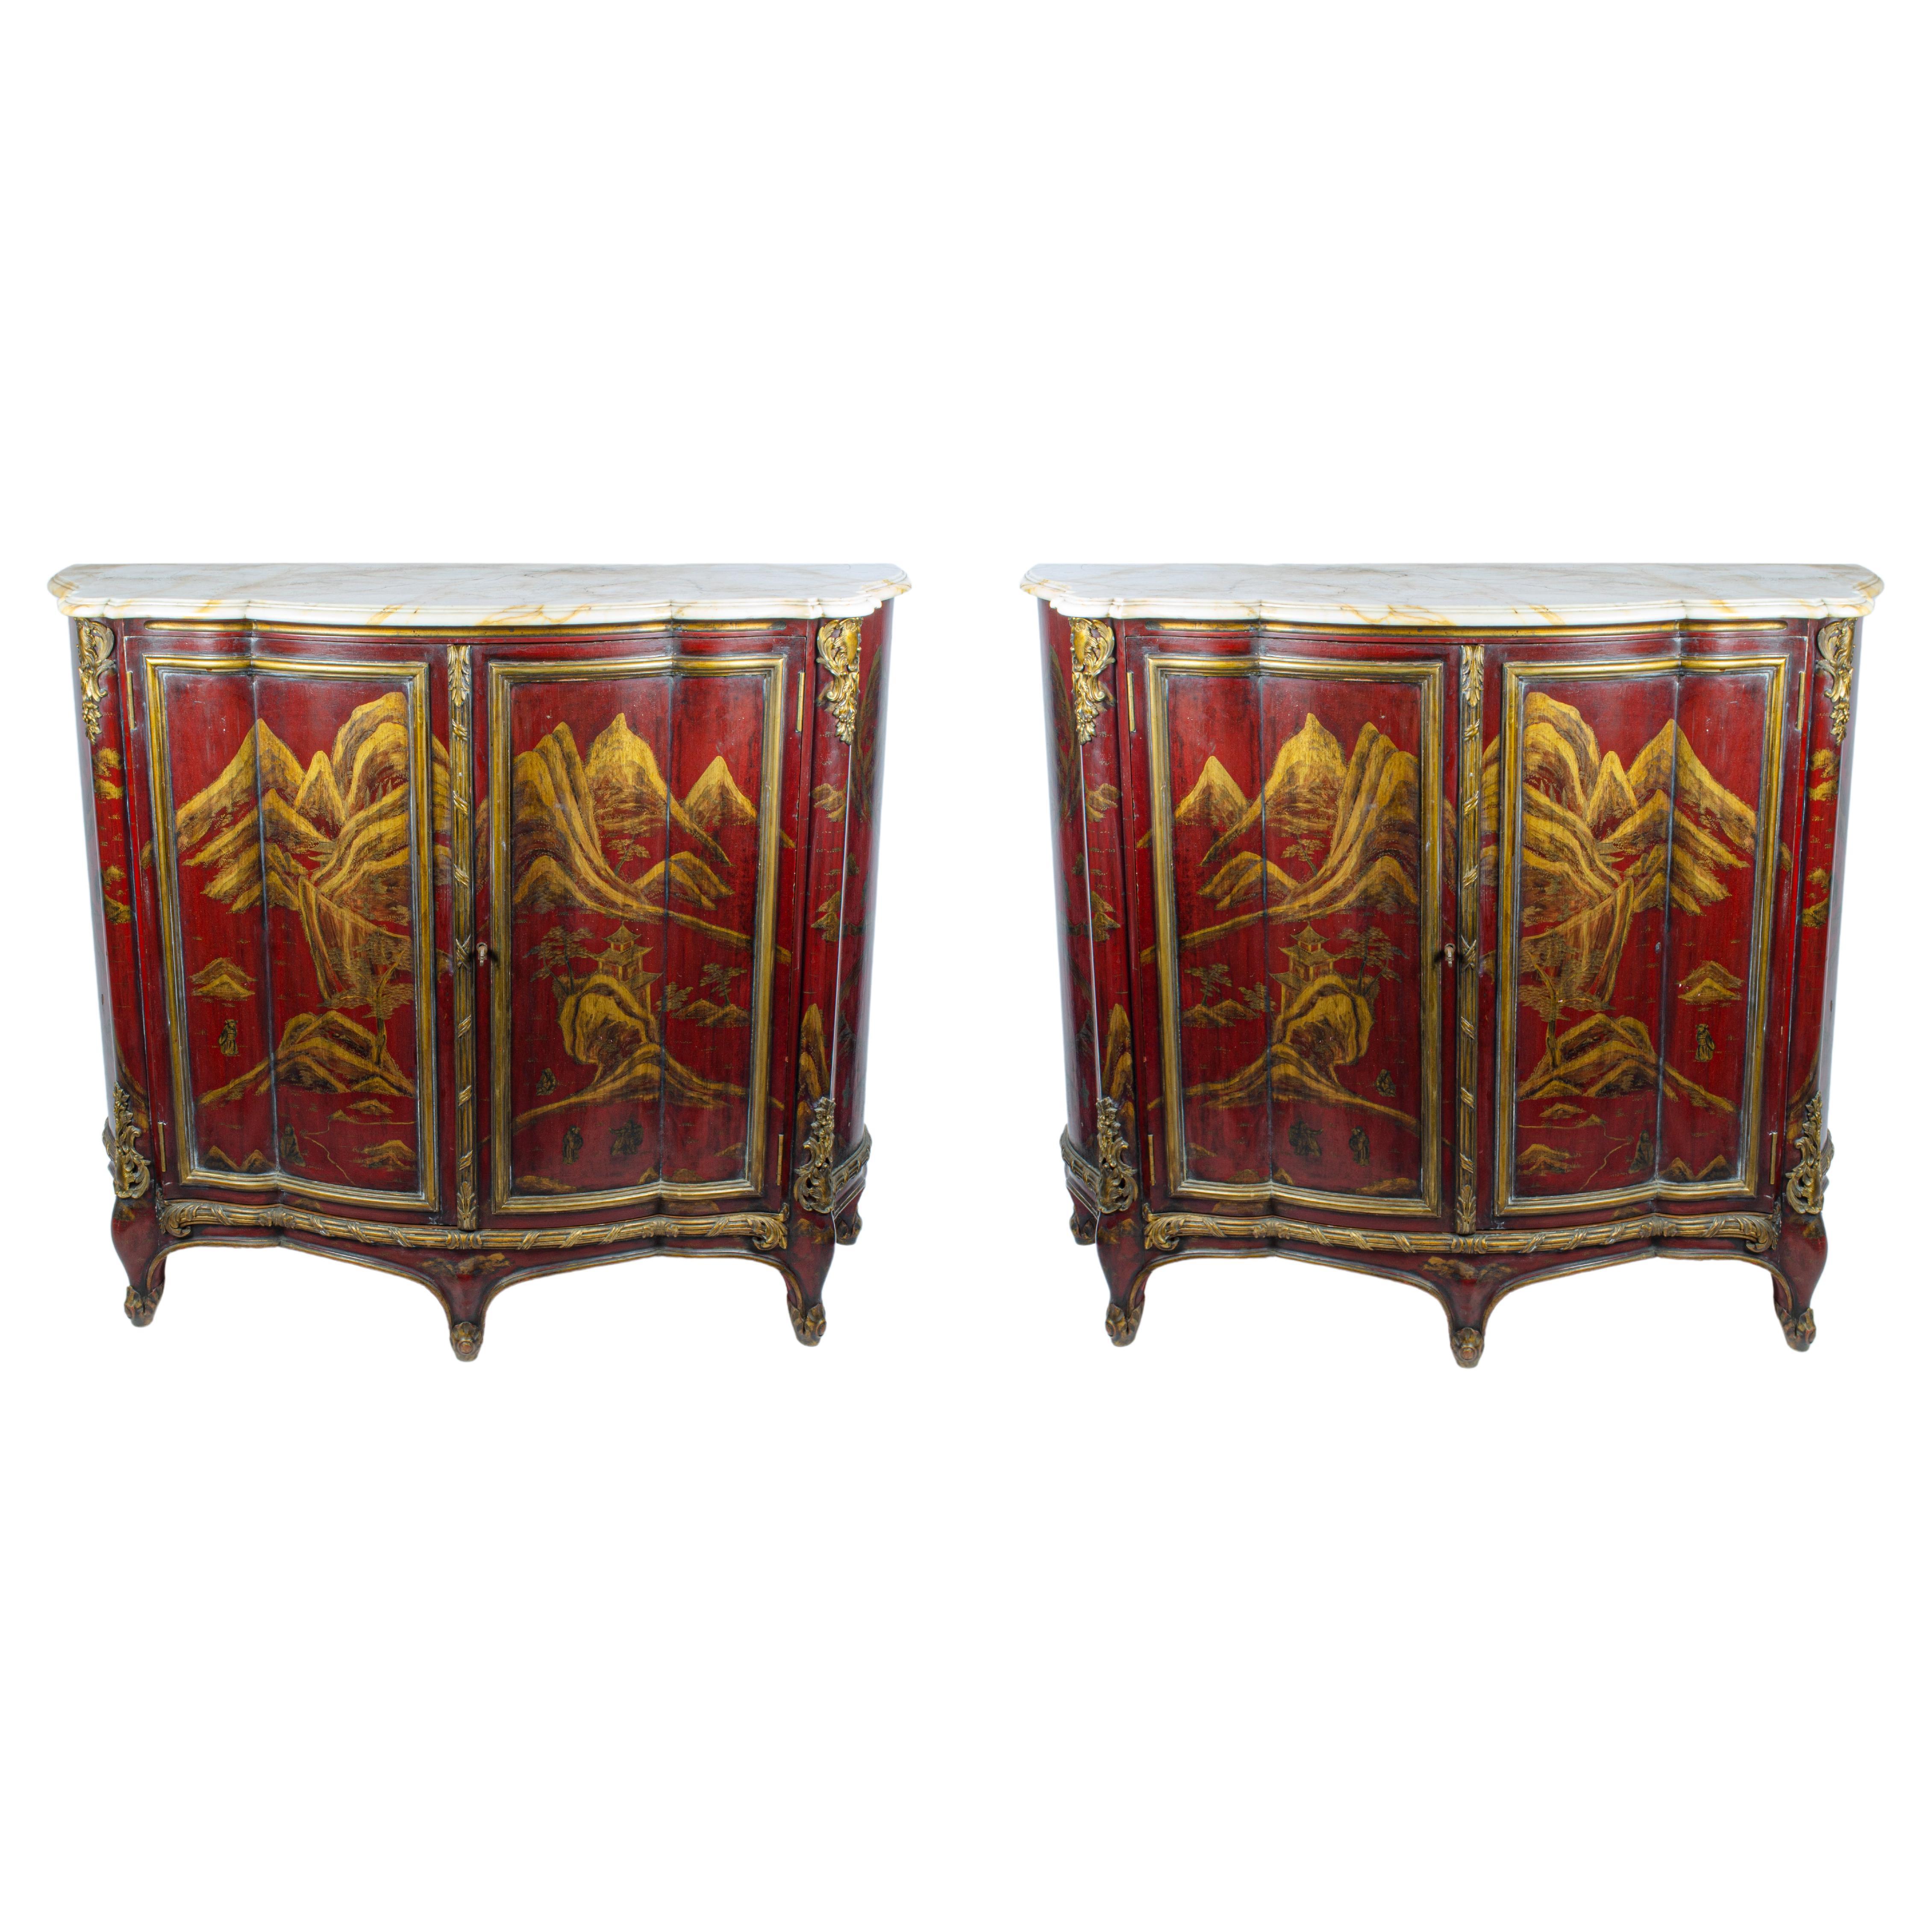 Pair of Cabinets with Chinoiserie Design by Maison Jansen